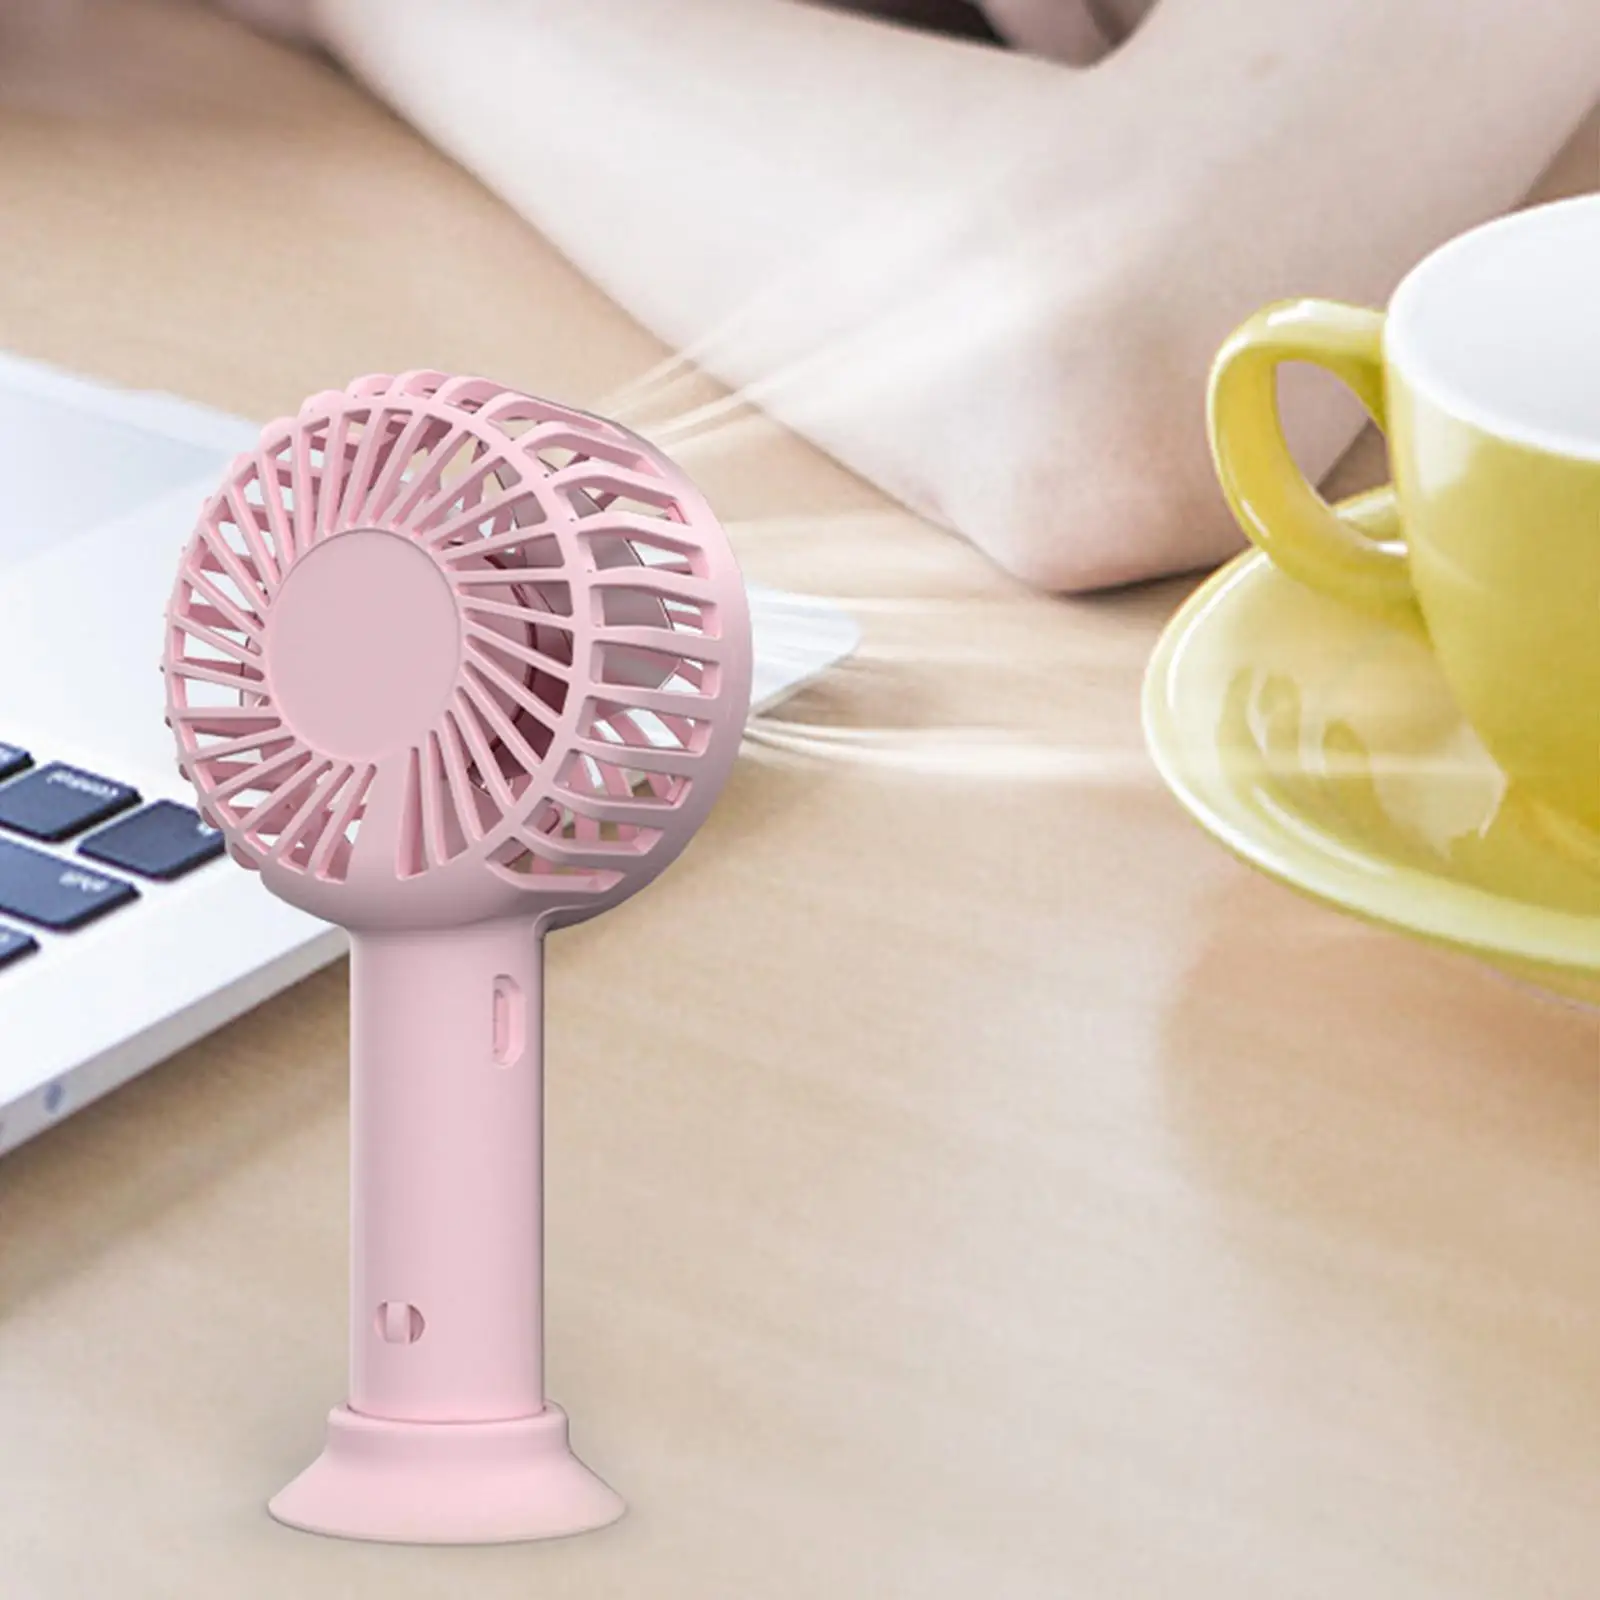 Handheld Portable Fan Small Hand Fan Cooling Face Fan 500mAh with Base for Makeup Indoor Outdoor Office Kids Gift Low Noise